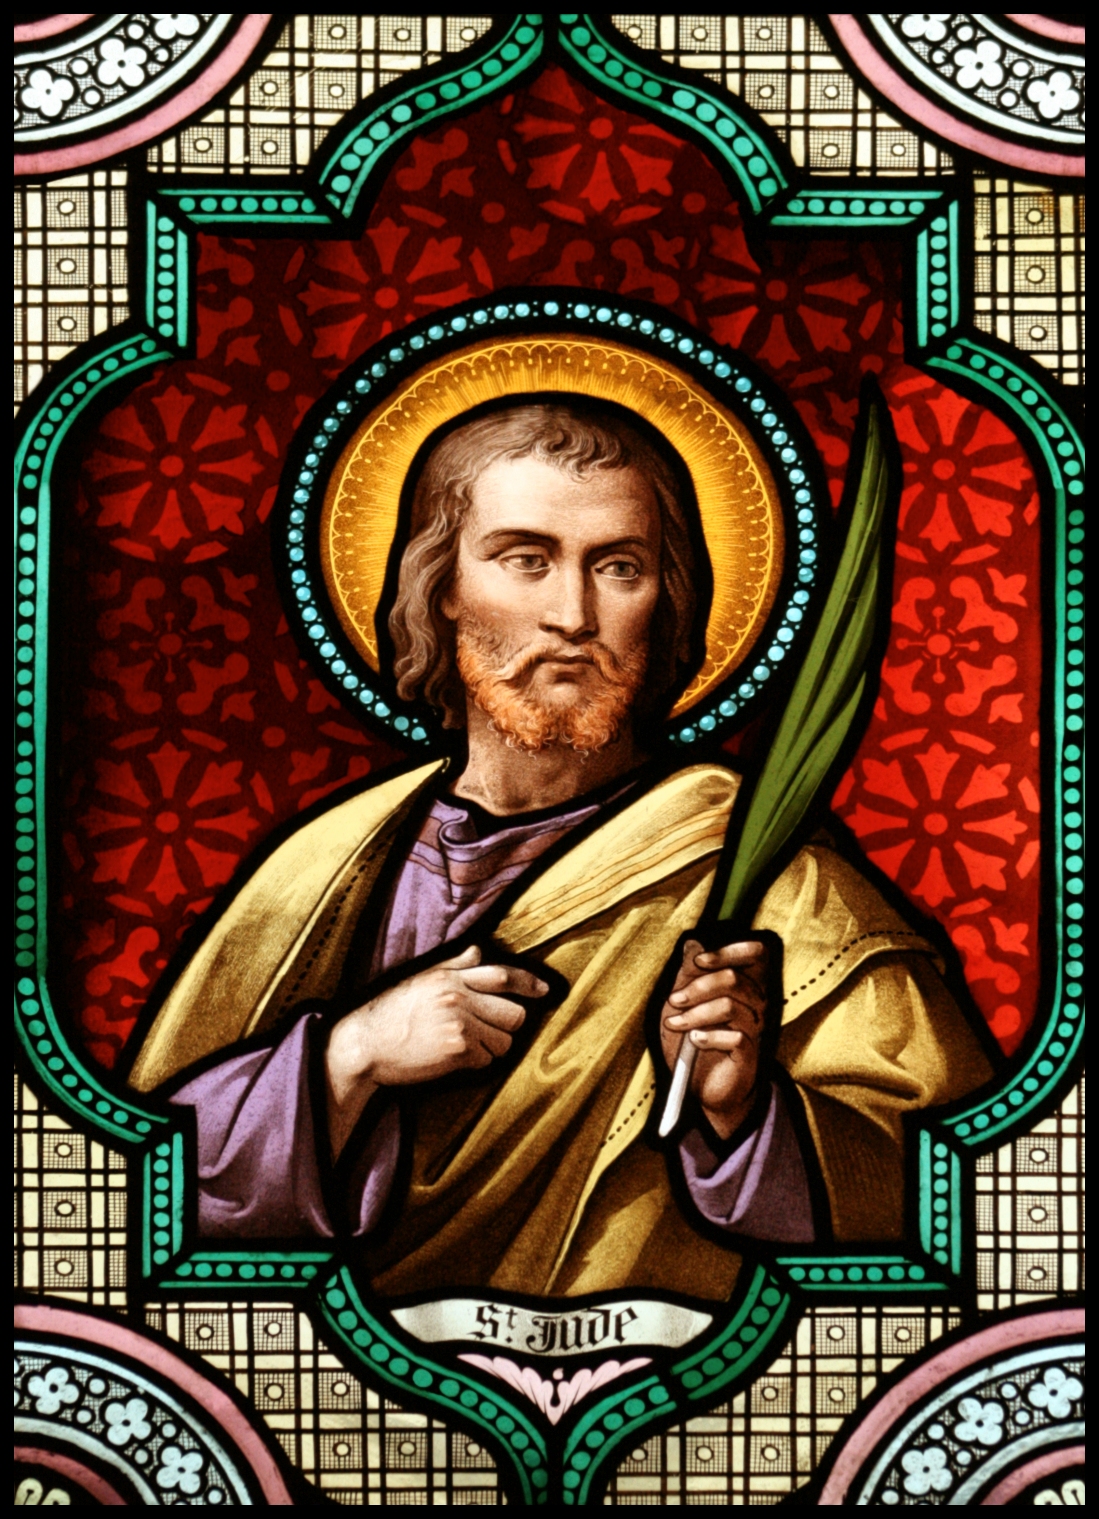 ST. JUDE IN STAINED GLASS